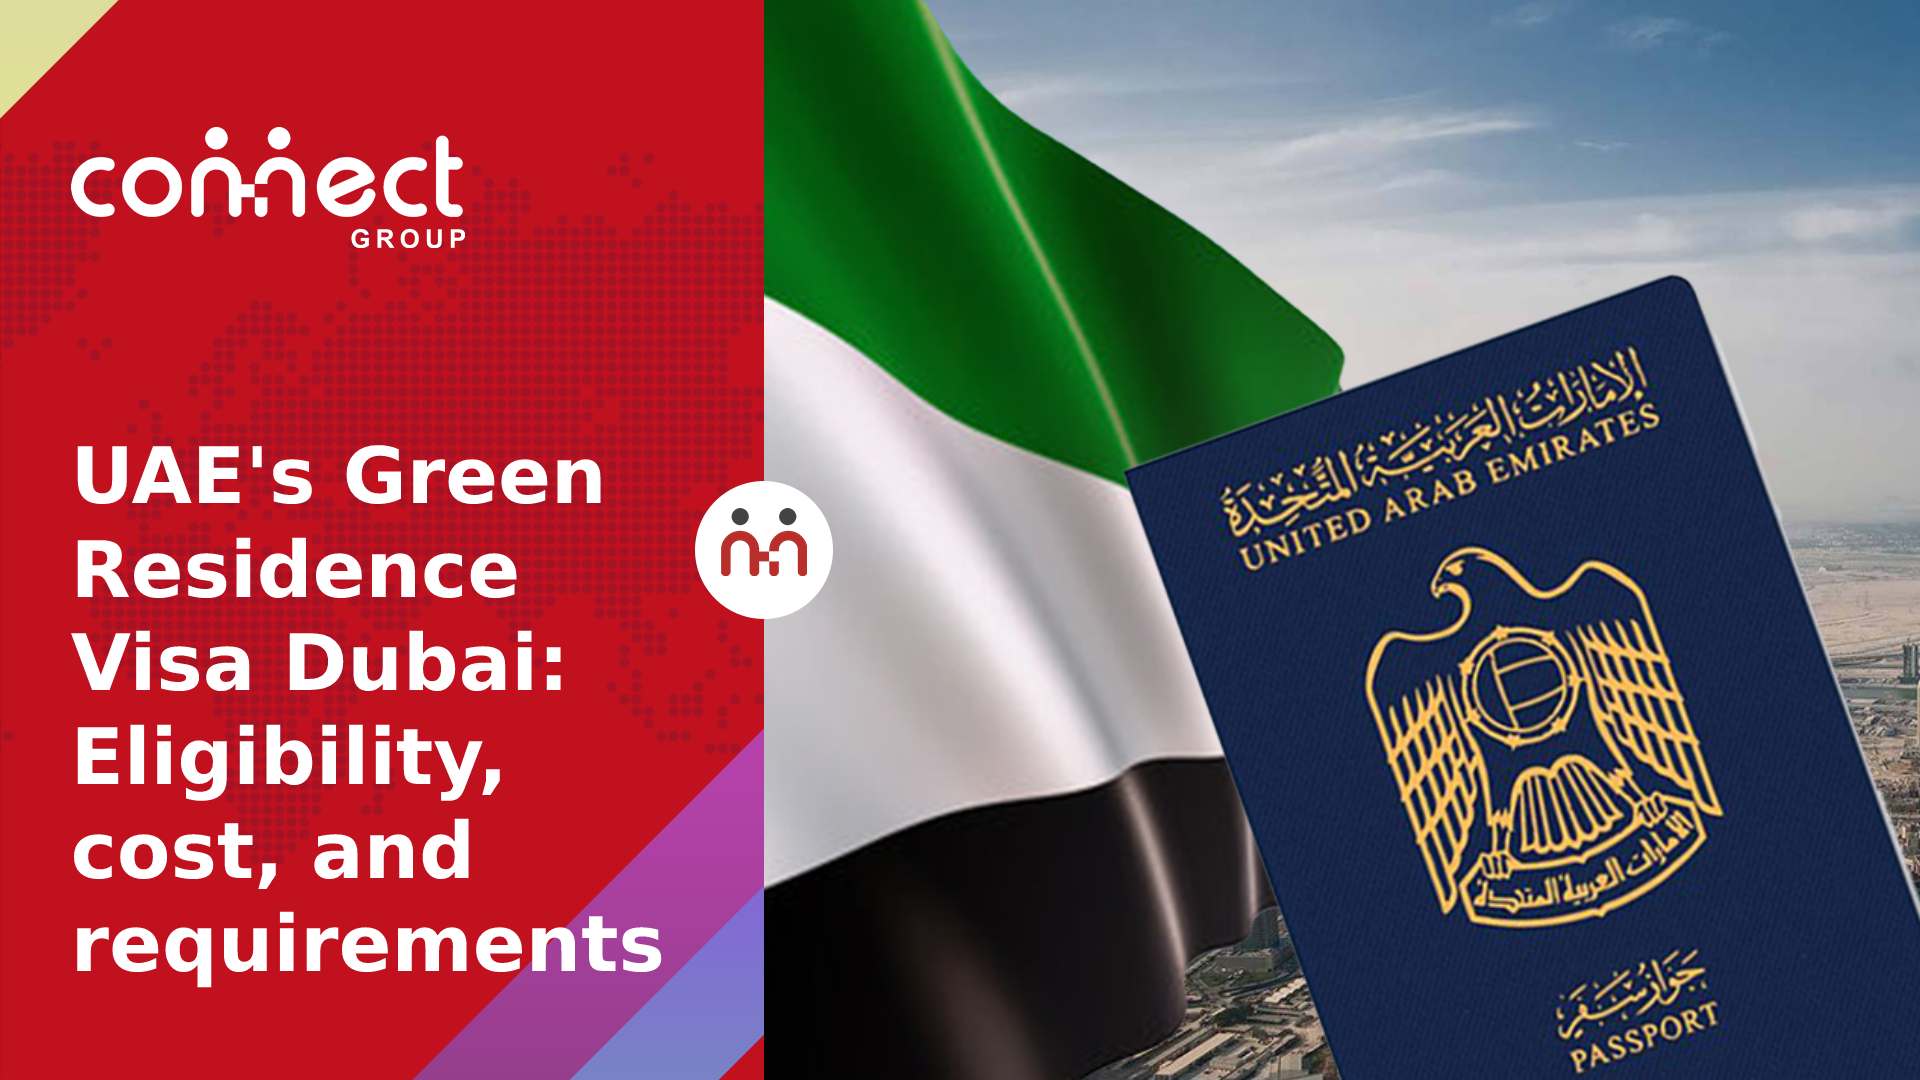 UAE’s Green Residence Visa Dubai: Eligibility, cost, and requirements